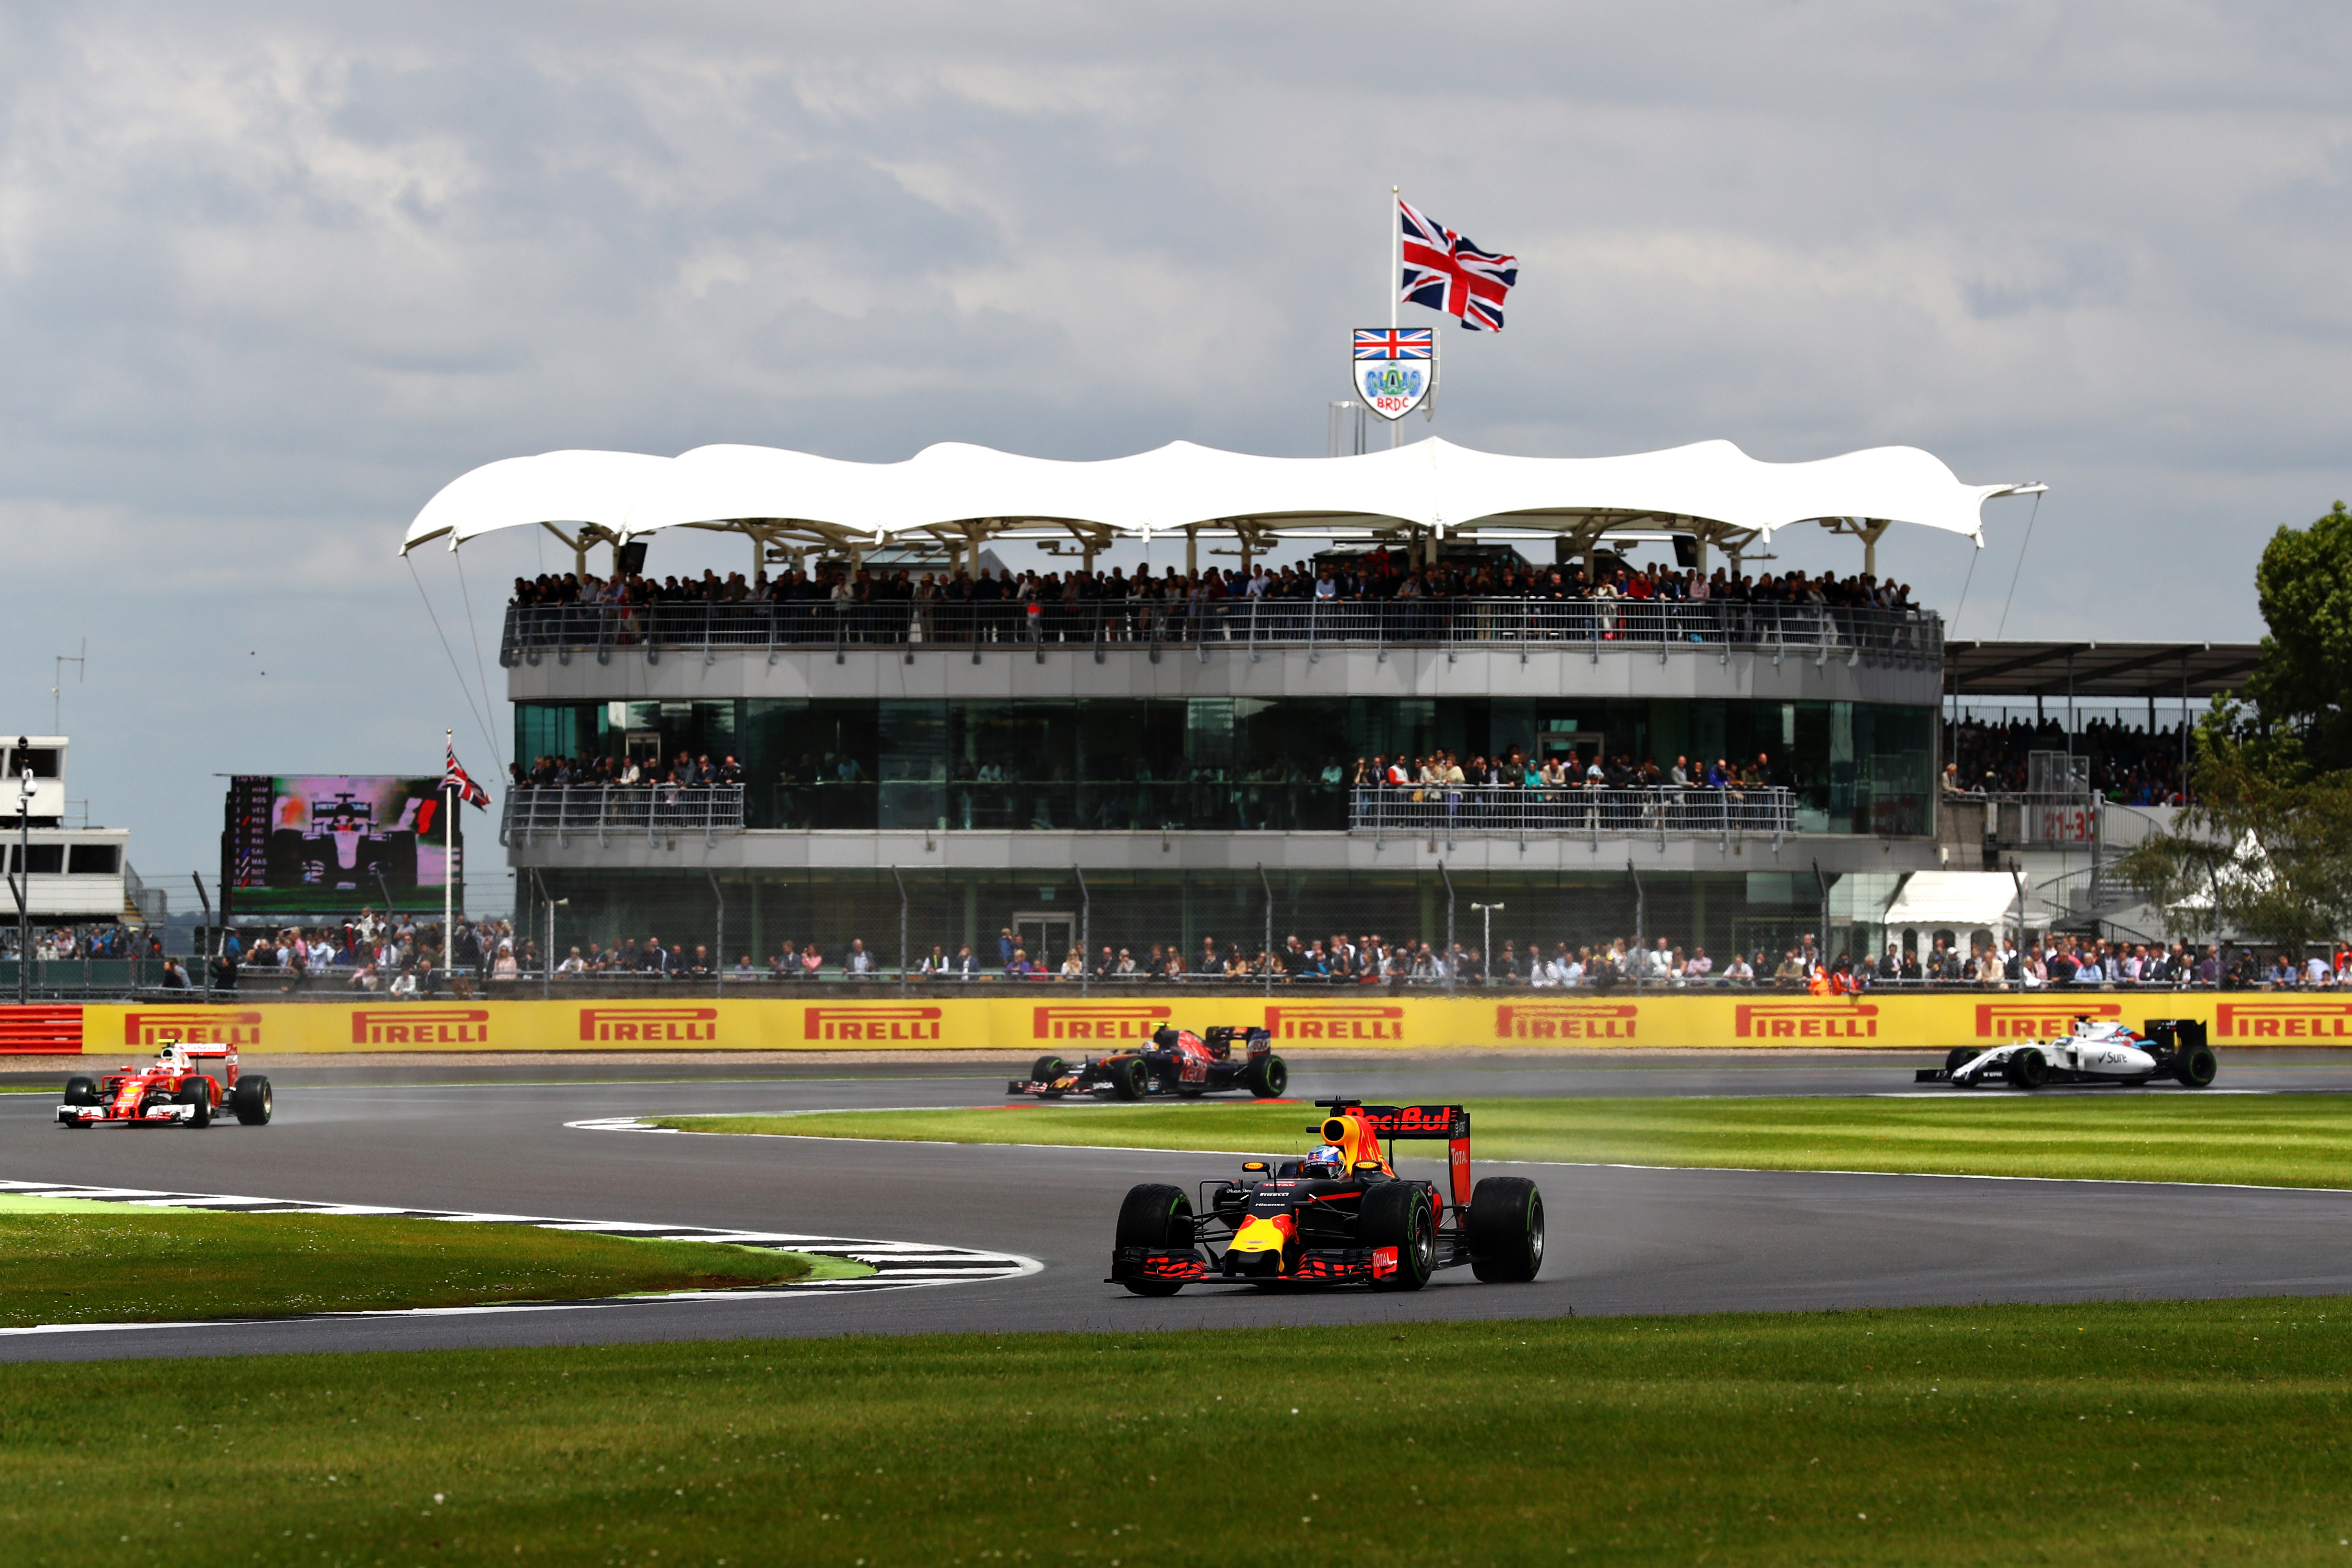 Everything you need to know about the British Formula 1 Grand Prix